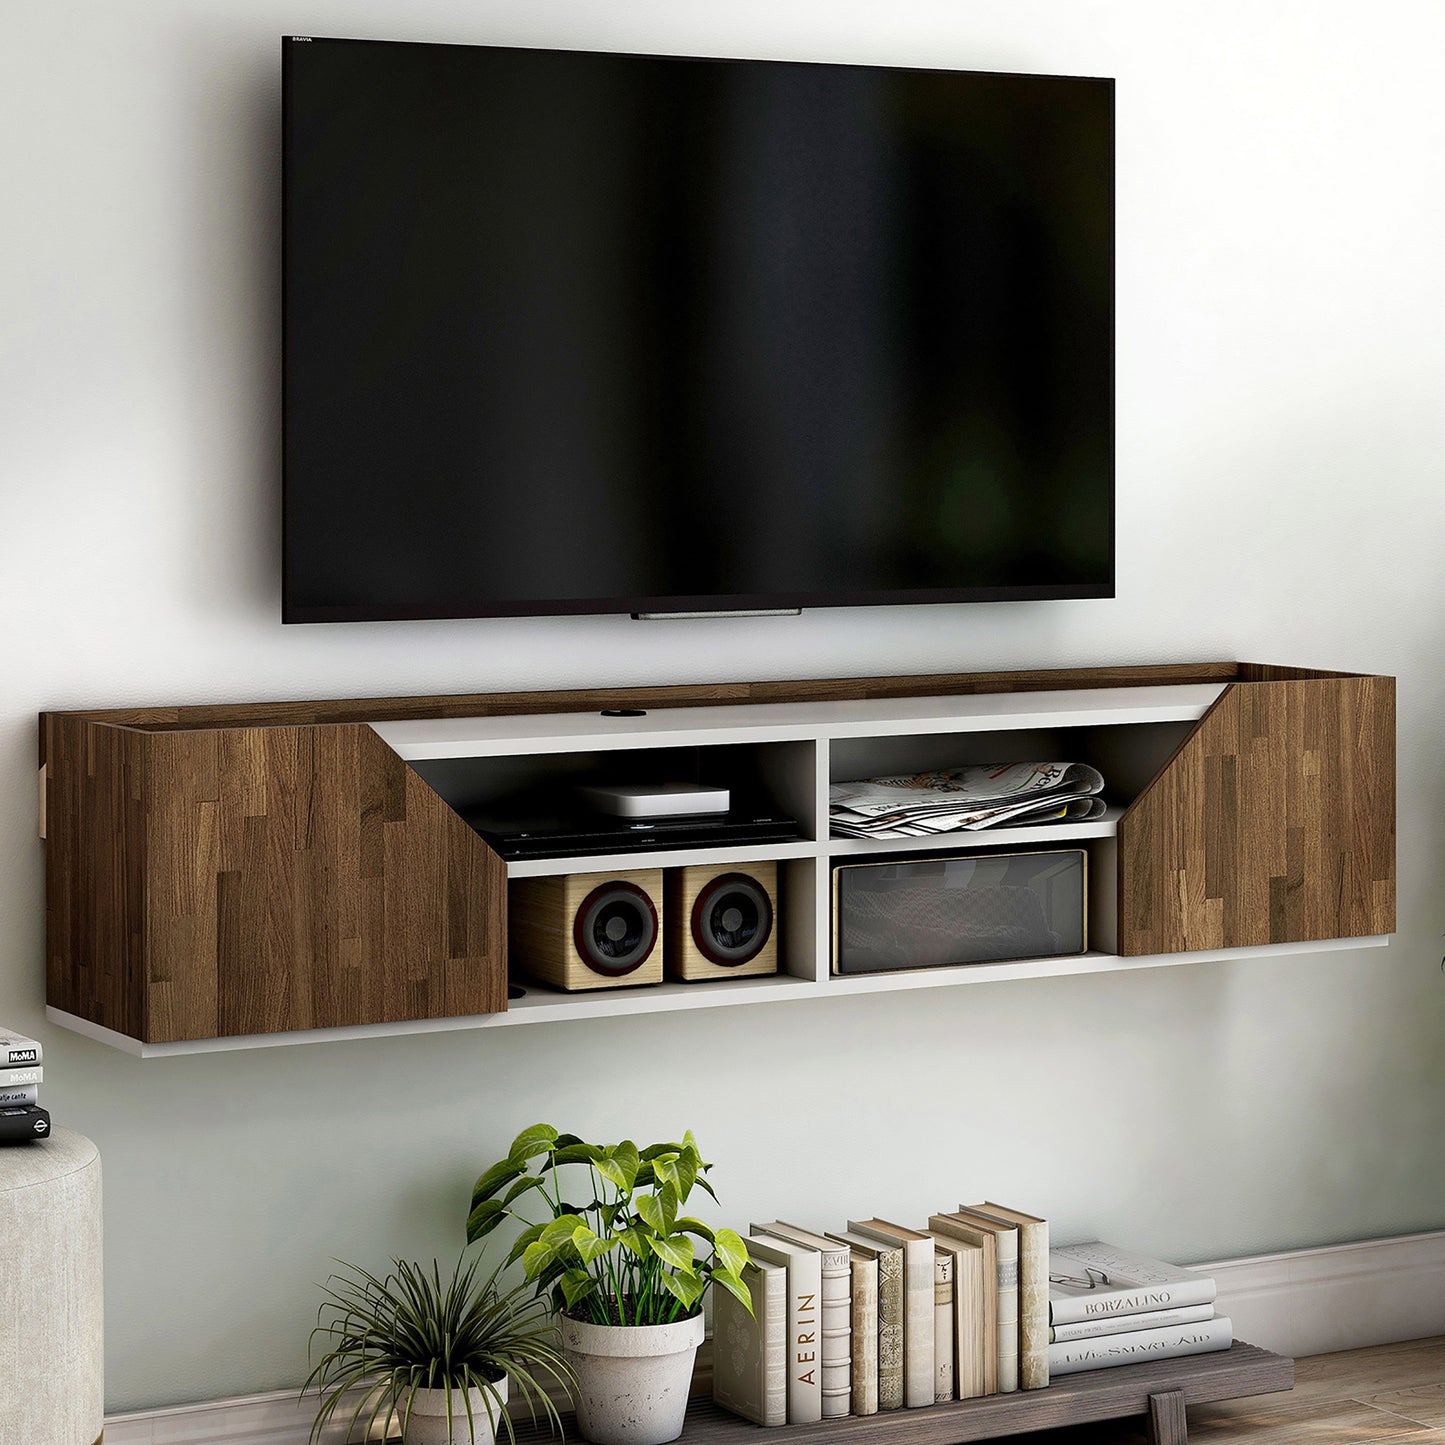 Right angled transitional white and wood four-shelf floating TV stand in a living room with accessories